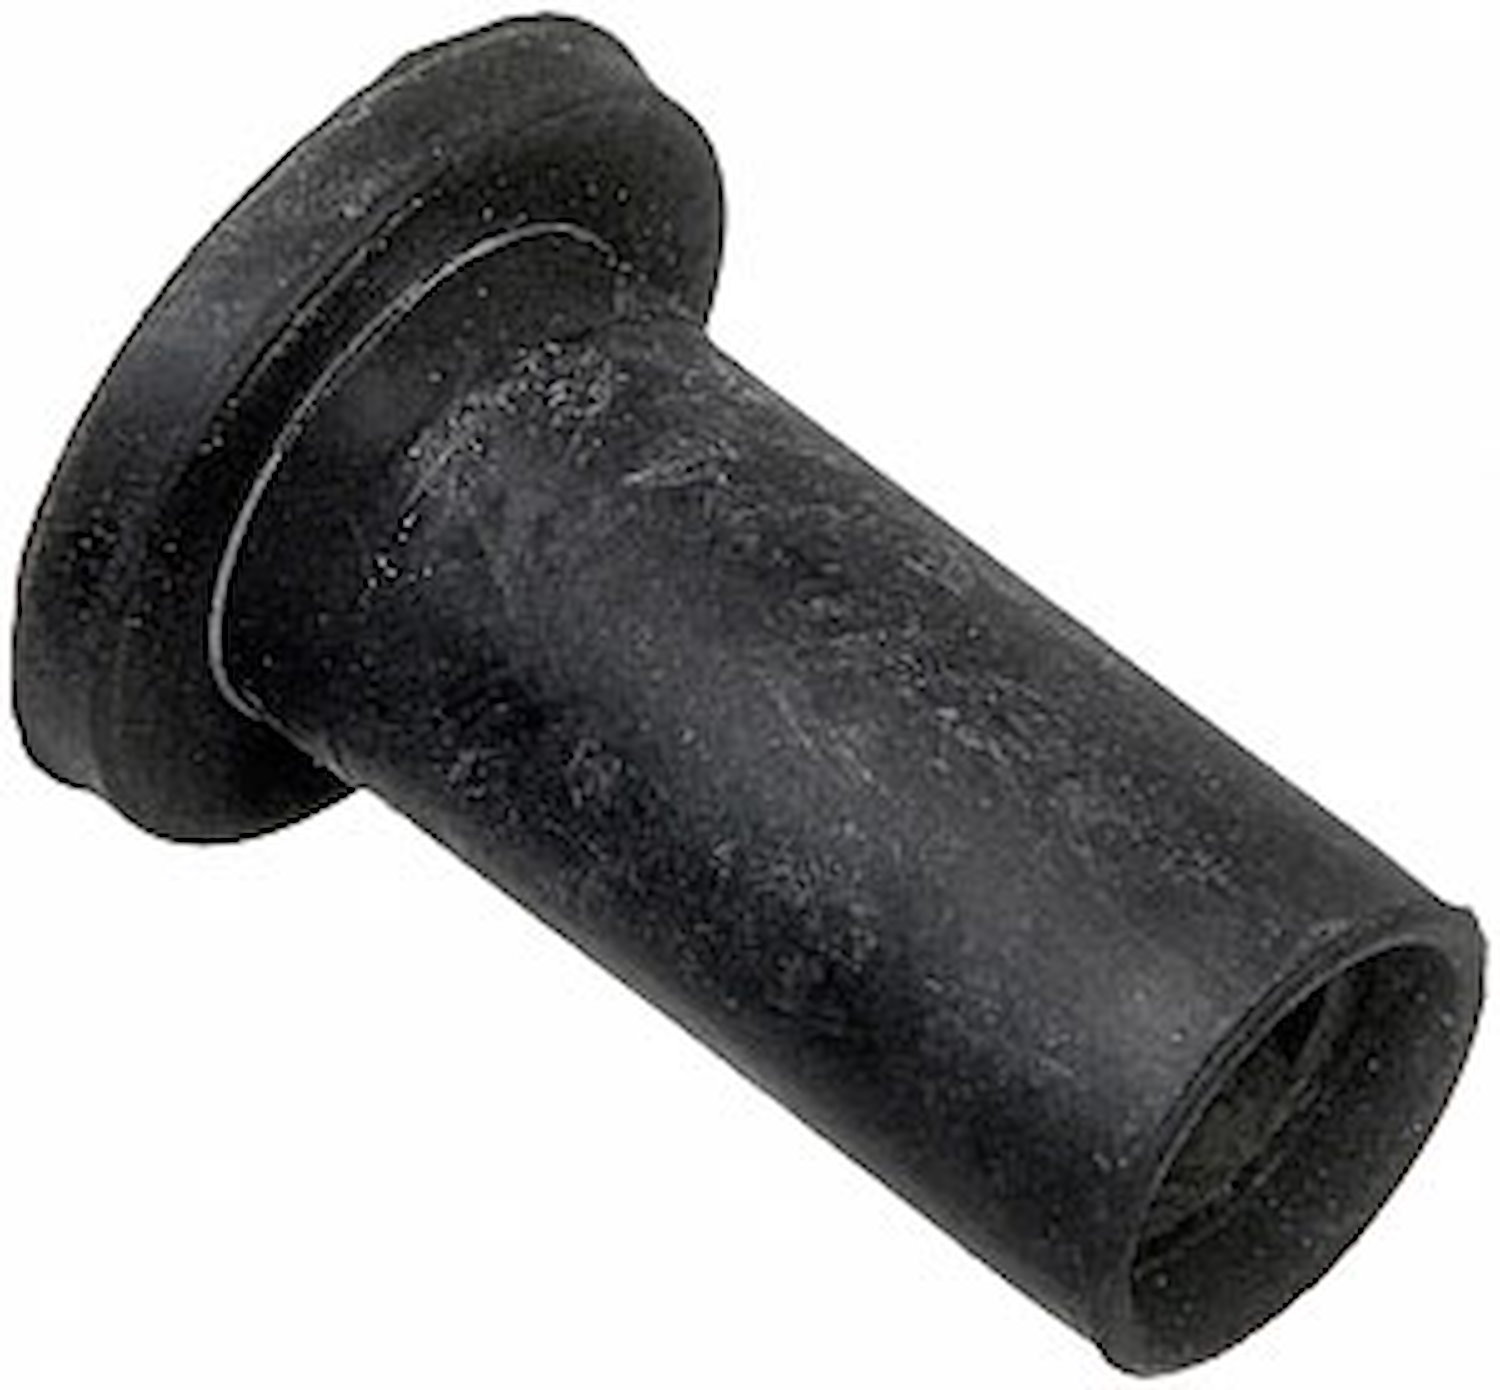 K7388 Front Steering Gear Bushing for Select 1997-2011